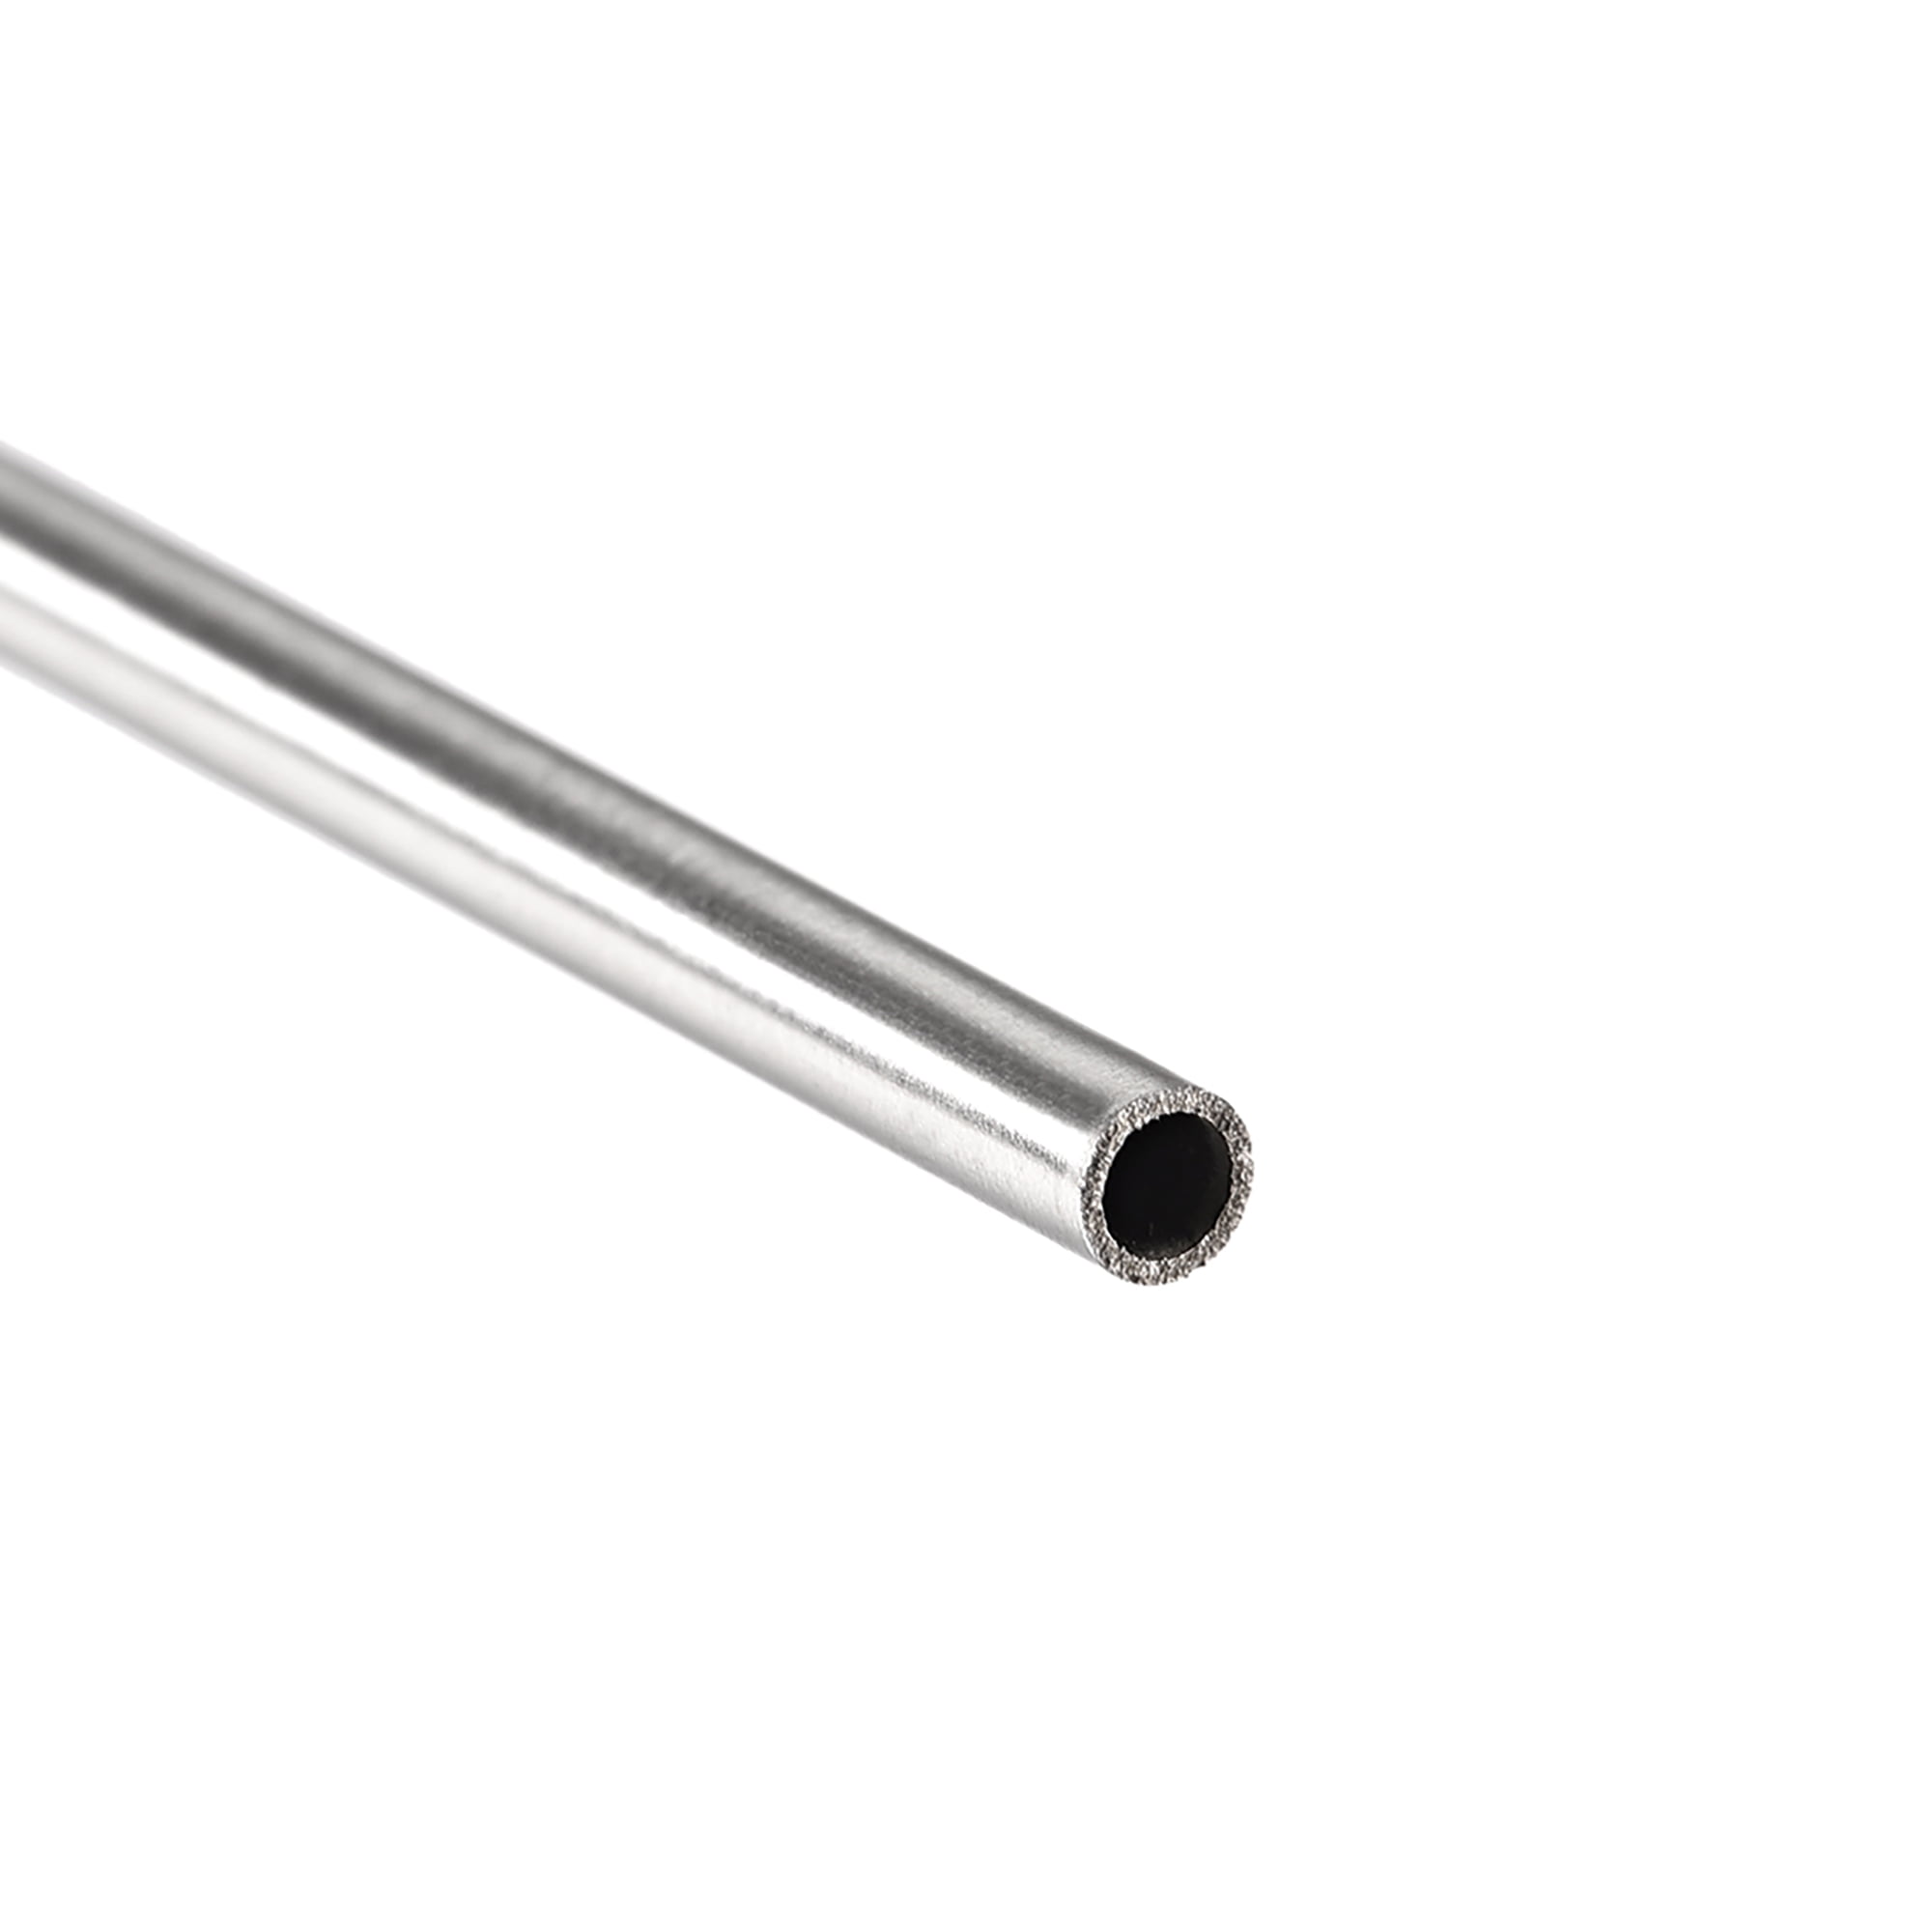 uxcell 304 Stainless Steel Capillary Tube Tubing 2.2mm ID 3.2mm OD 300mm Length 0.5mm Wall 